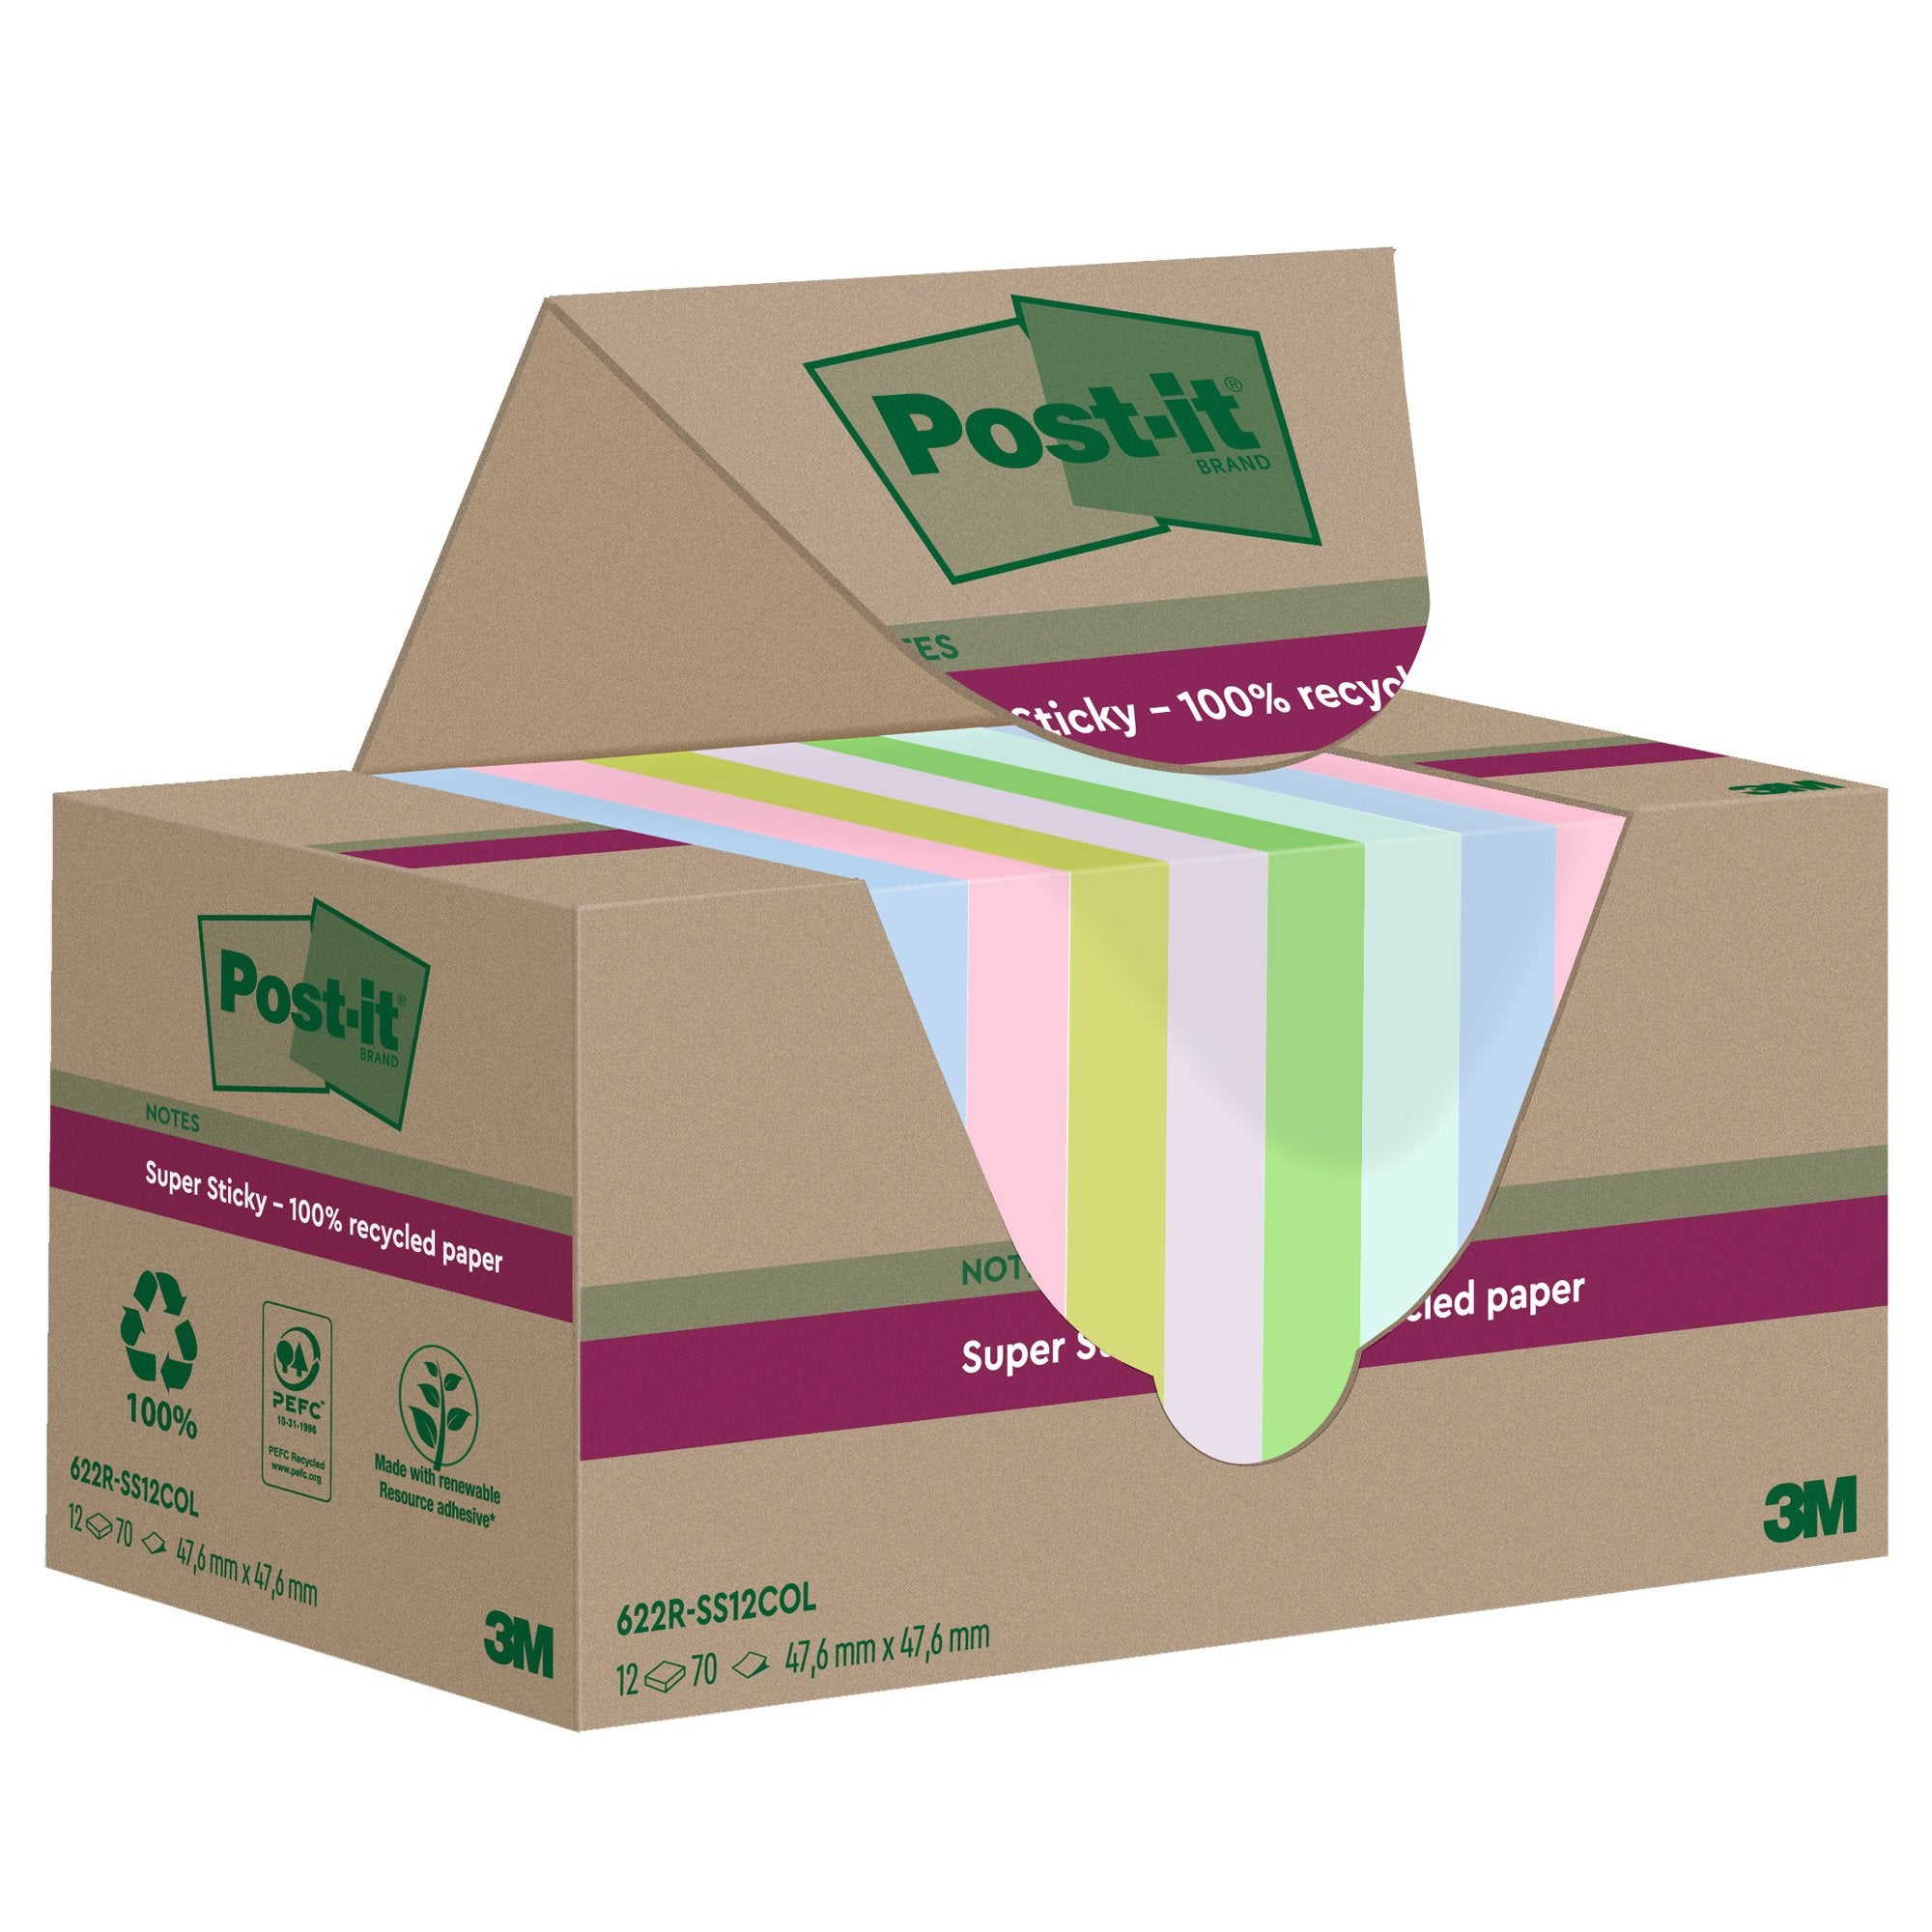 post-it-cf-12pz-blocco-70fg-supersticky-green-47-6x47x6mm-622r-ss12col-pastello